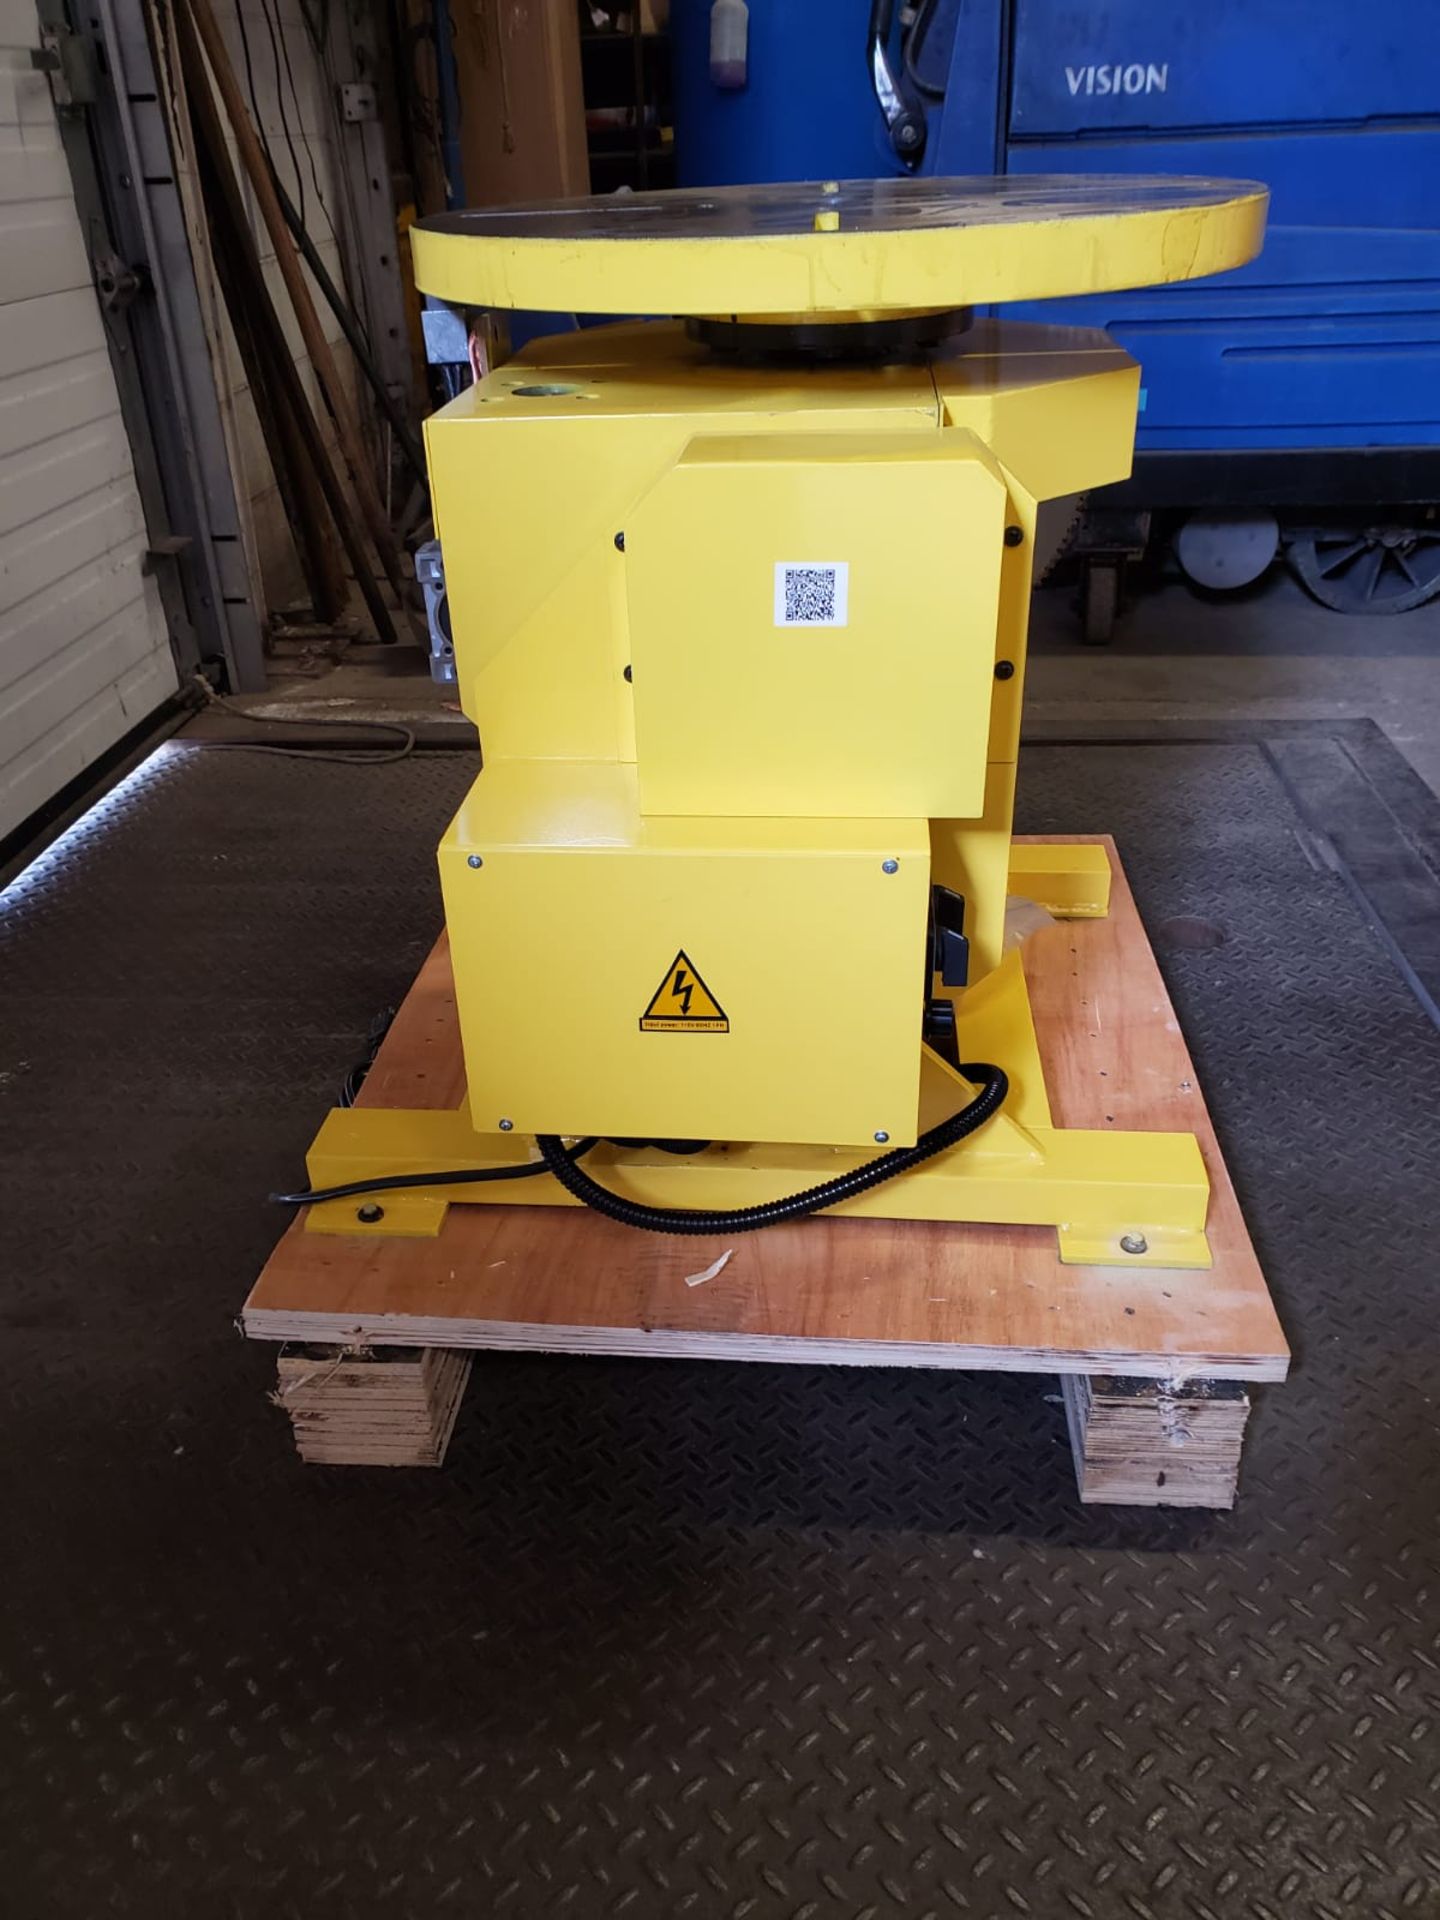 Verner model VD-1250 WELDING POSITIONER 1250lbs capacity - tilt and rotate - UNUSED AND MINT 115V - Image 4 of 4